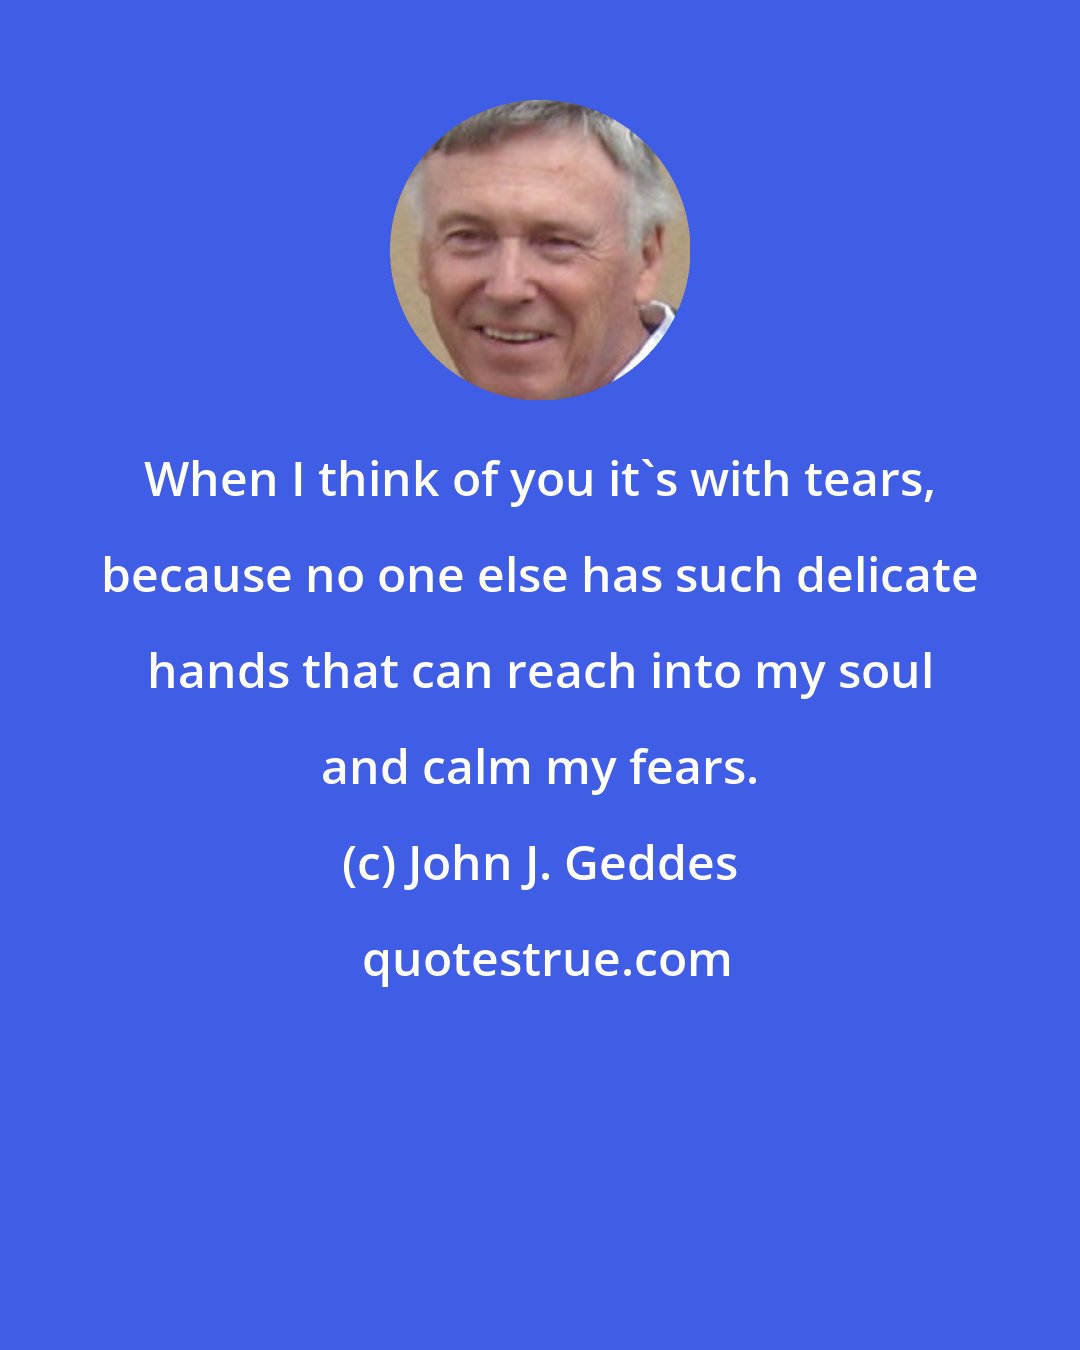 John J. Geddes: When I think of you it's with tears, because no one else has such delicate hands that can reach into my soul and calm my fears.